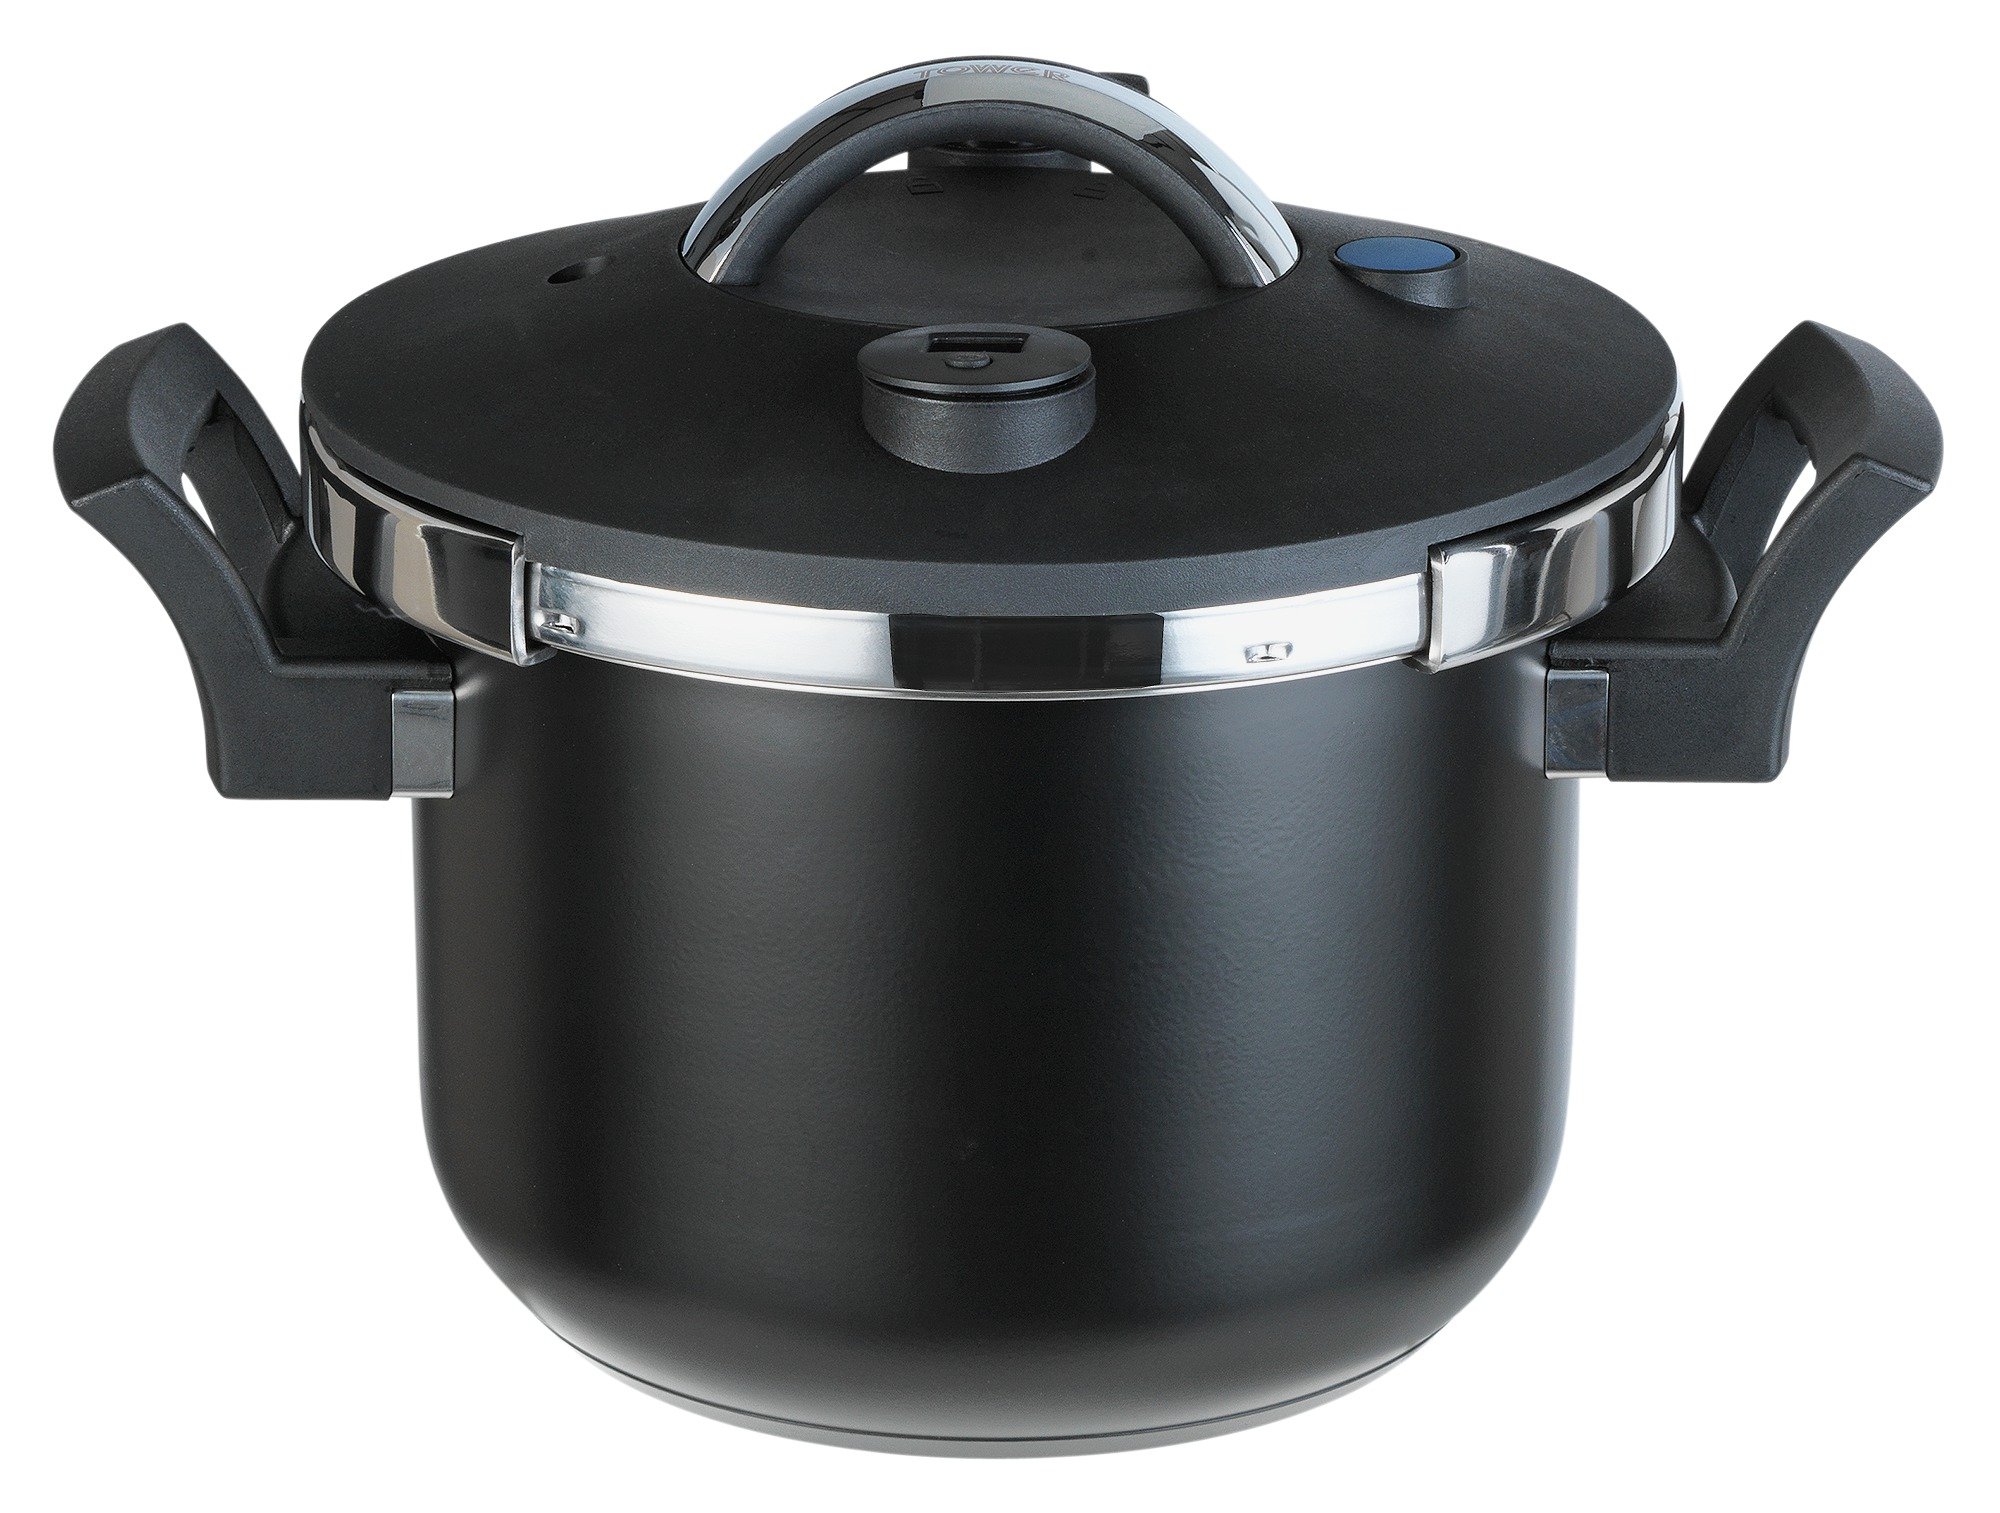 Tower 6 Litre Sure Touch Pressure Cooker - Black